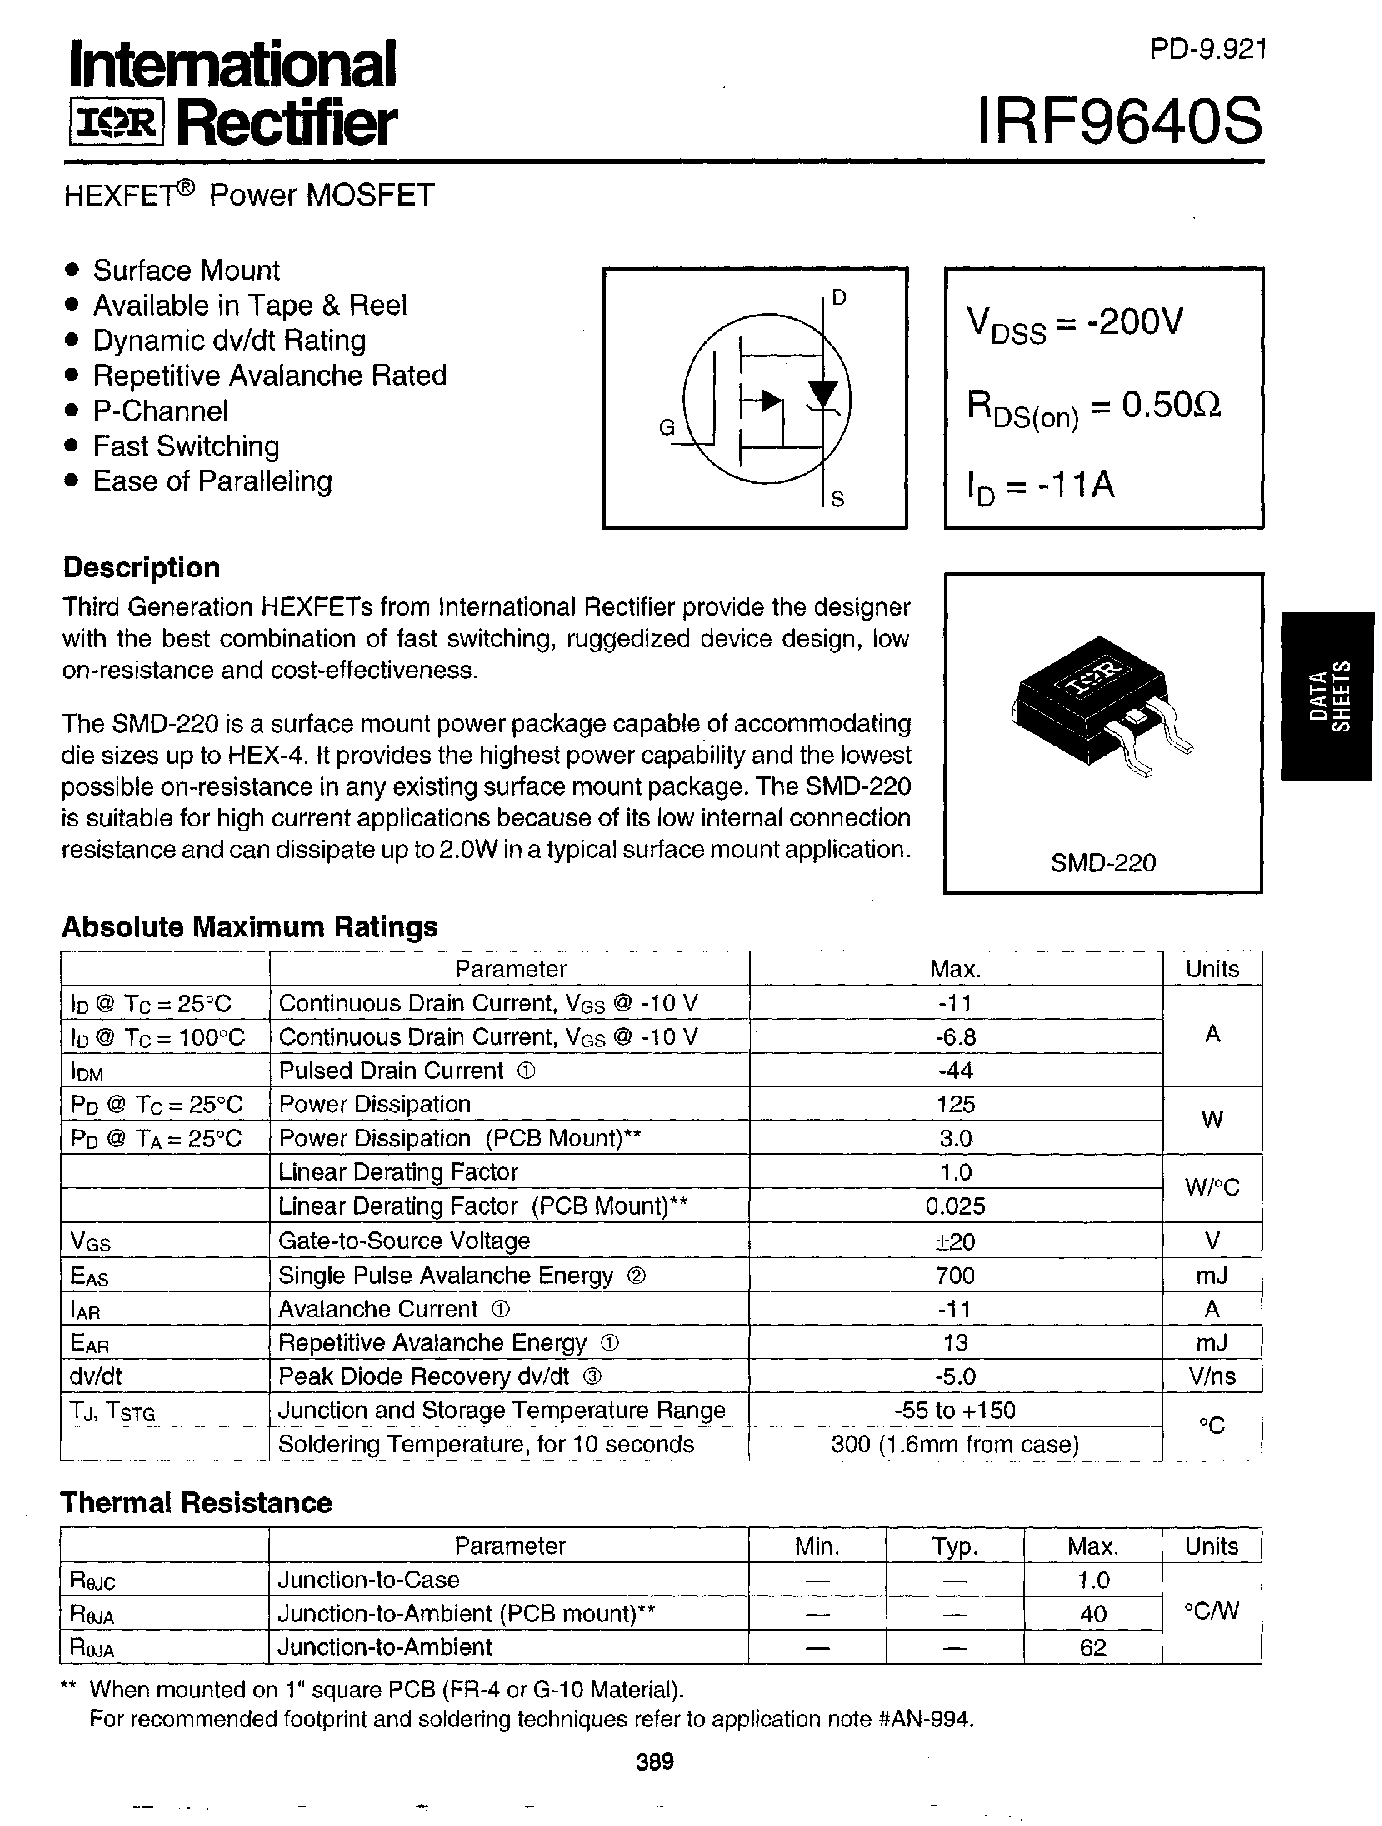 Datasheet IRF9640S - Power MOSFET(Vdss=-200V/ Rds(on)=0.50ohm/ Id=-11A) page 1